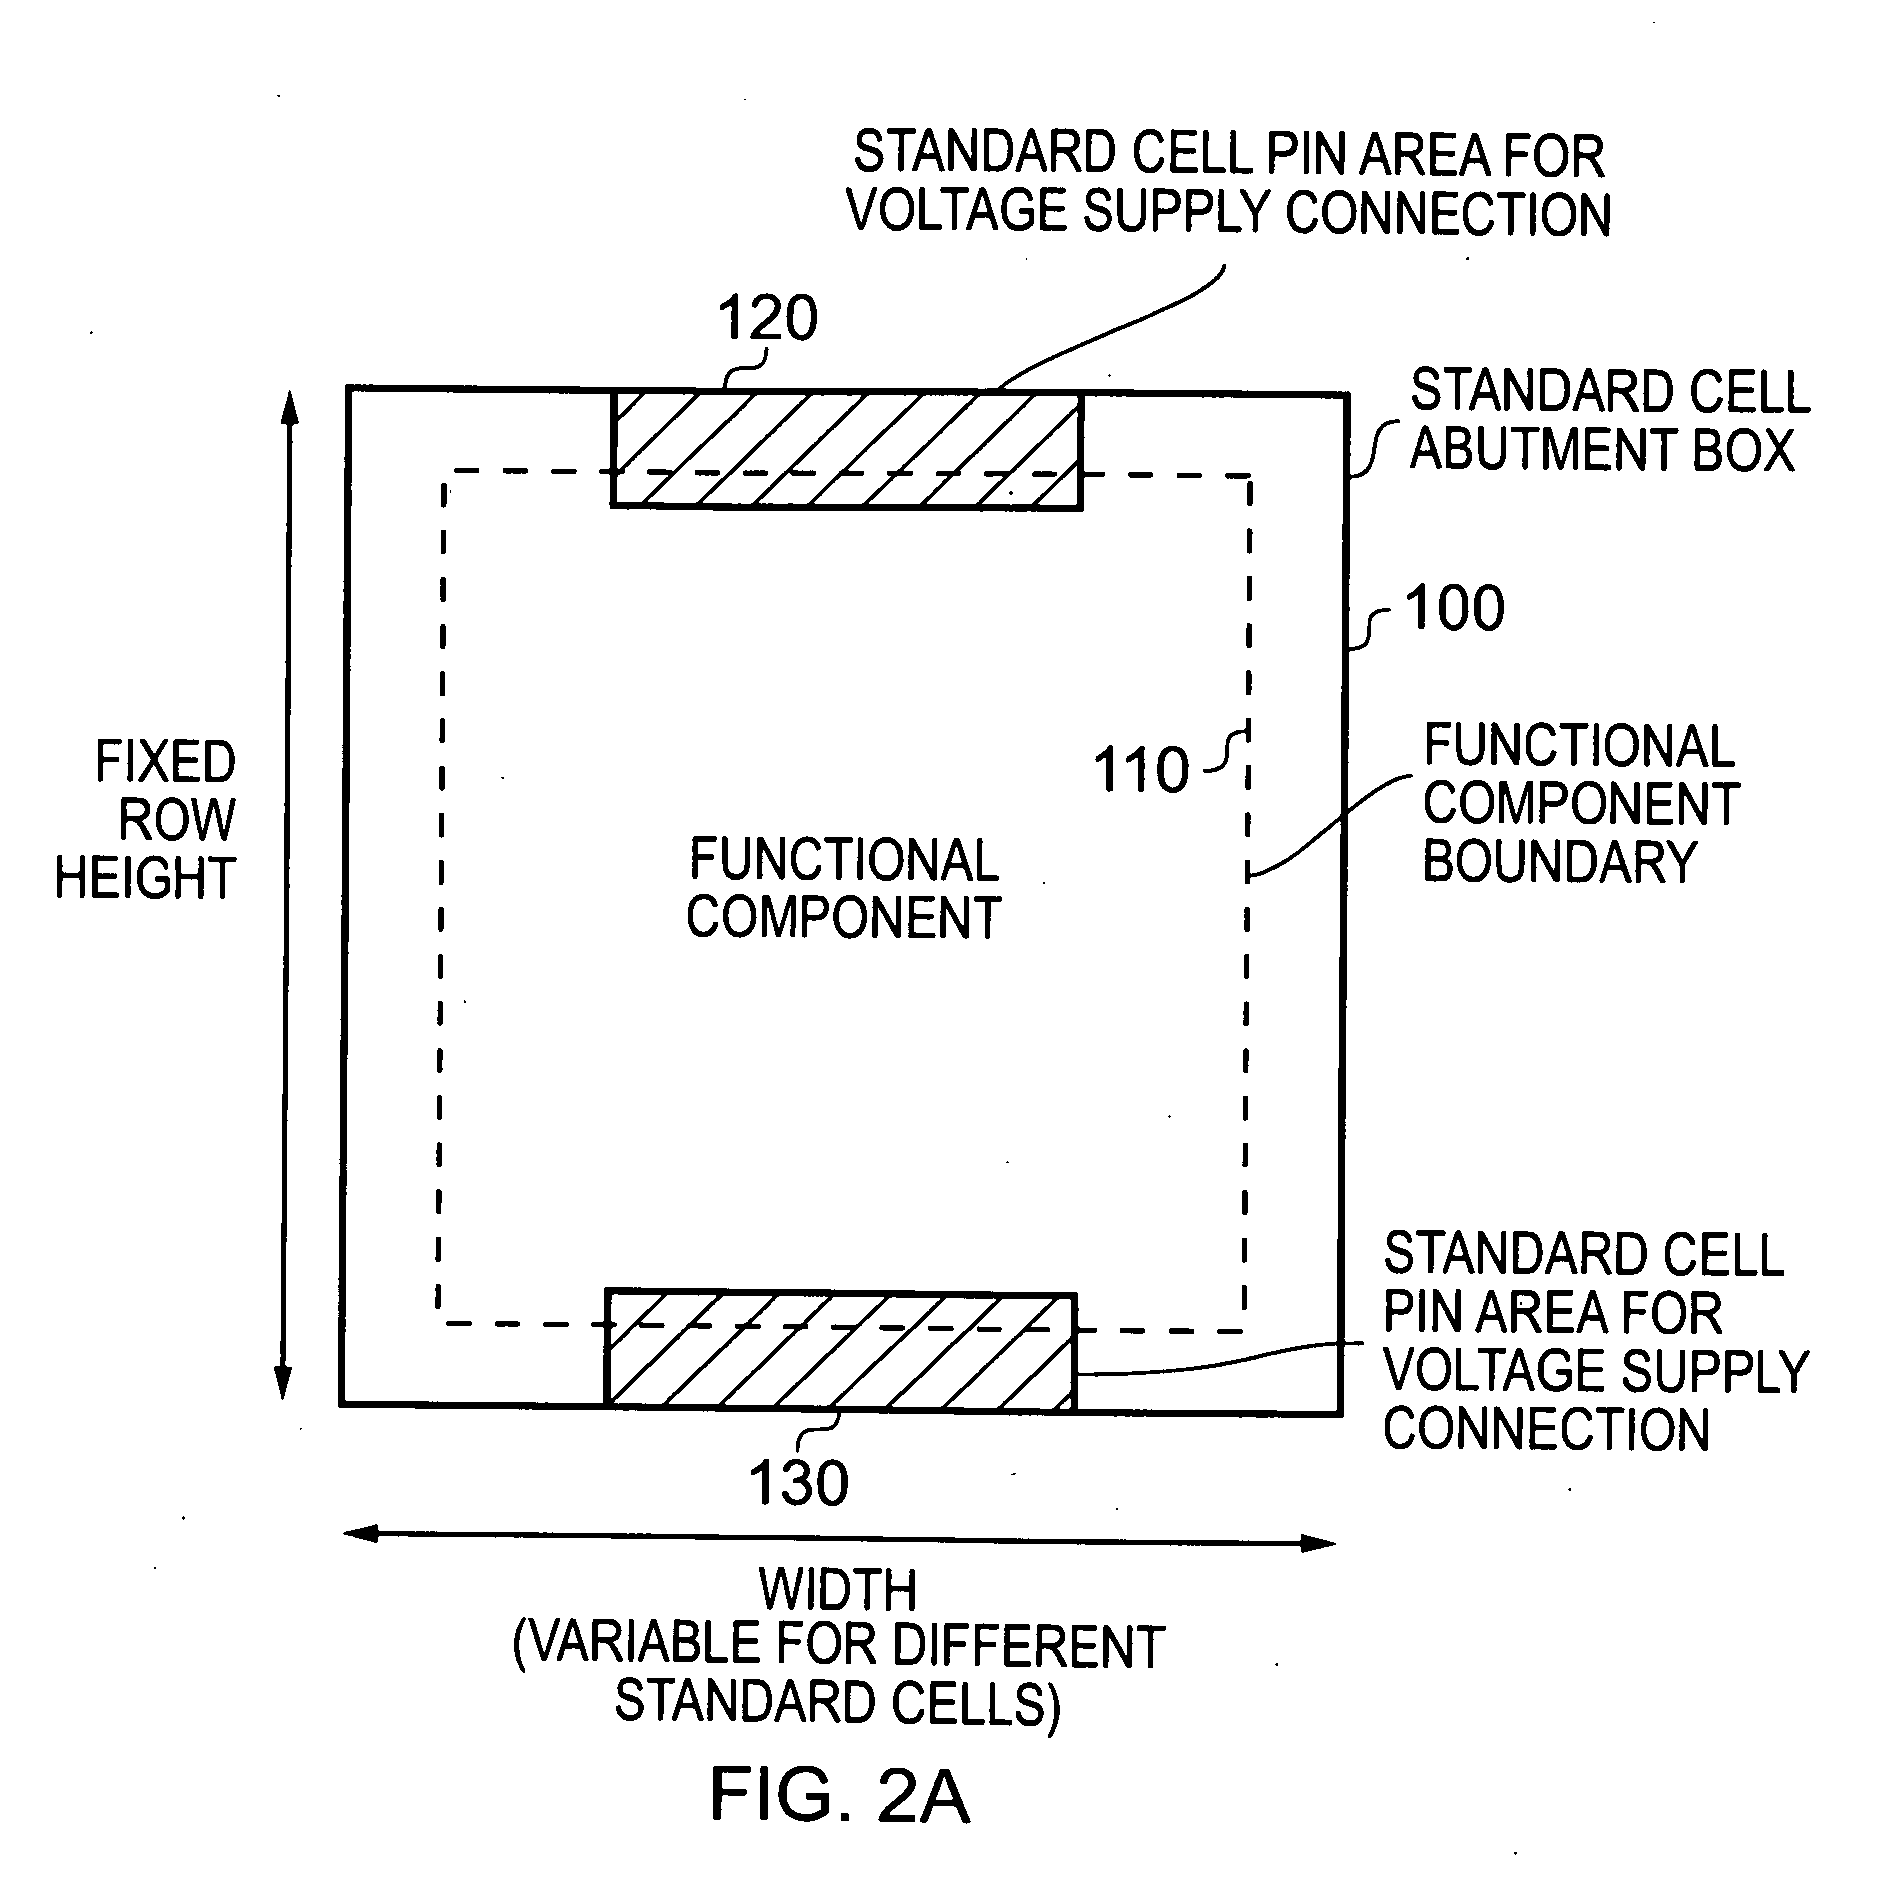 Integrated circuit, method of generating a layout of an integrated circuit using standard cells, and a standard cell library providing such standard cells